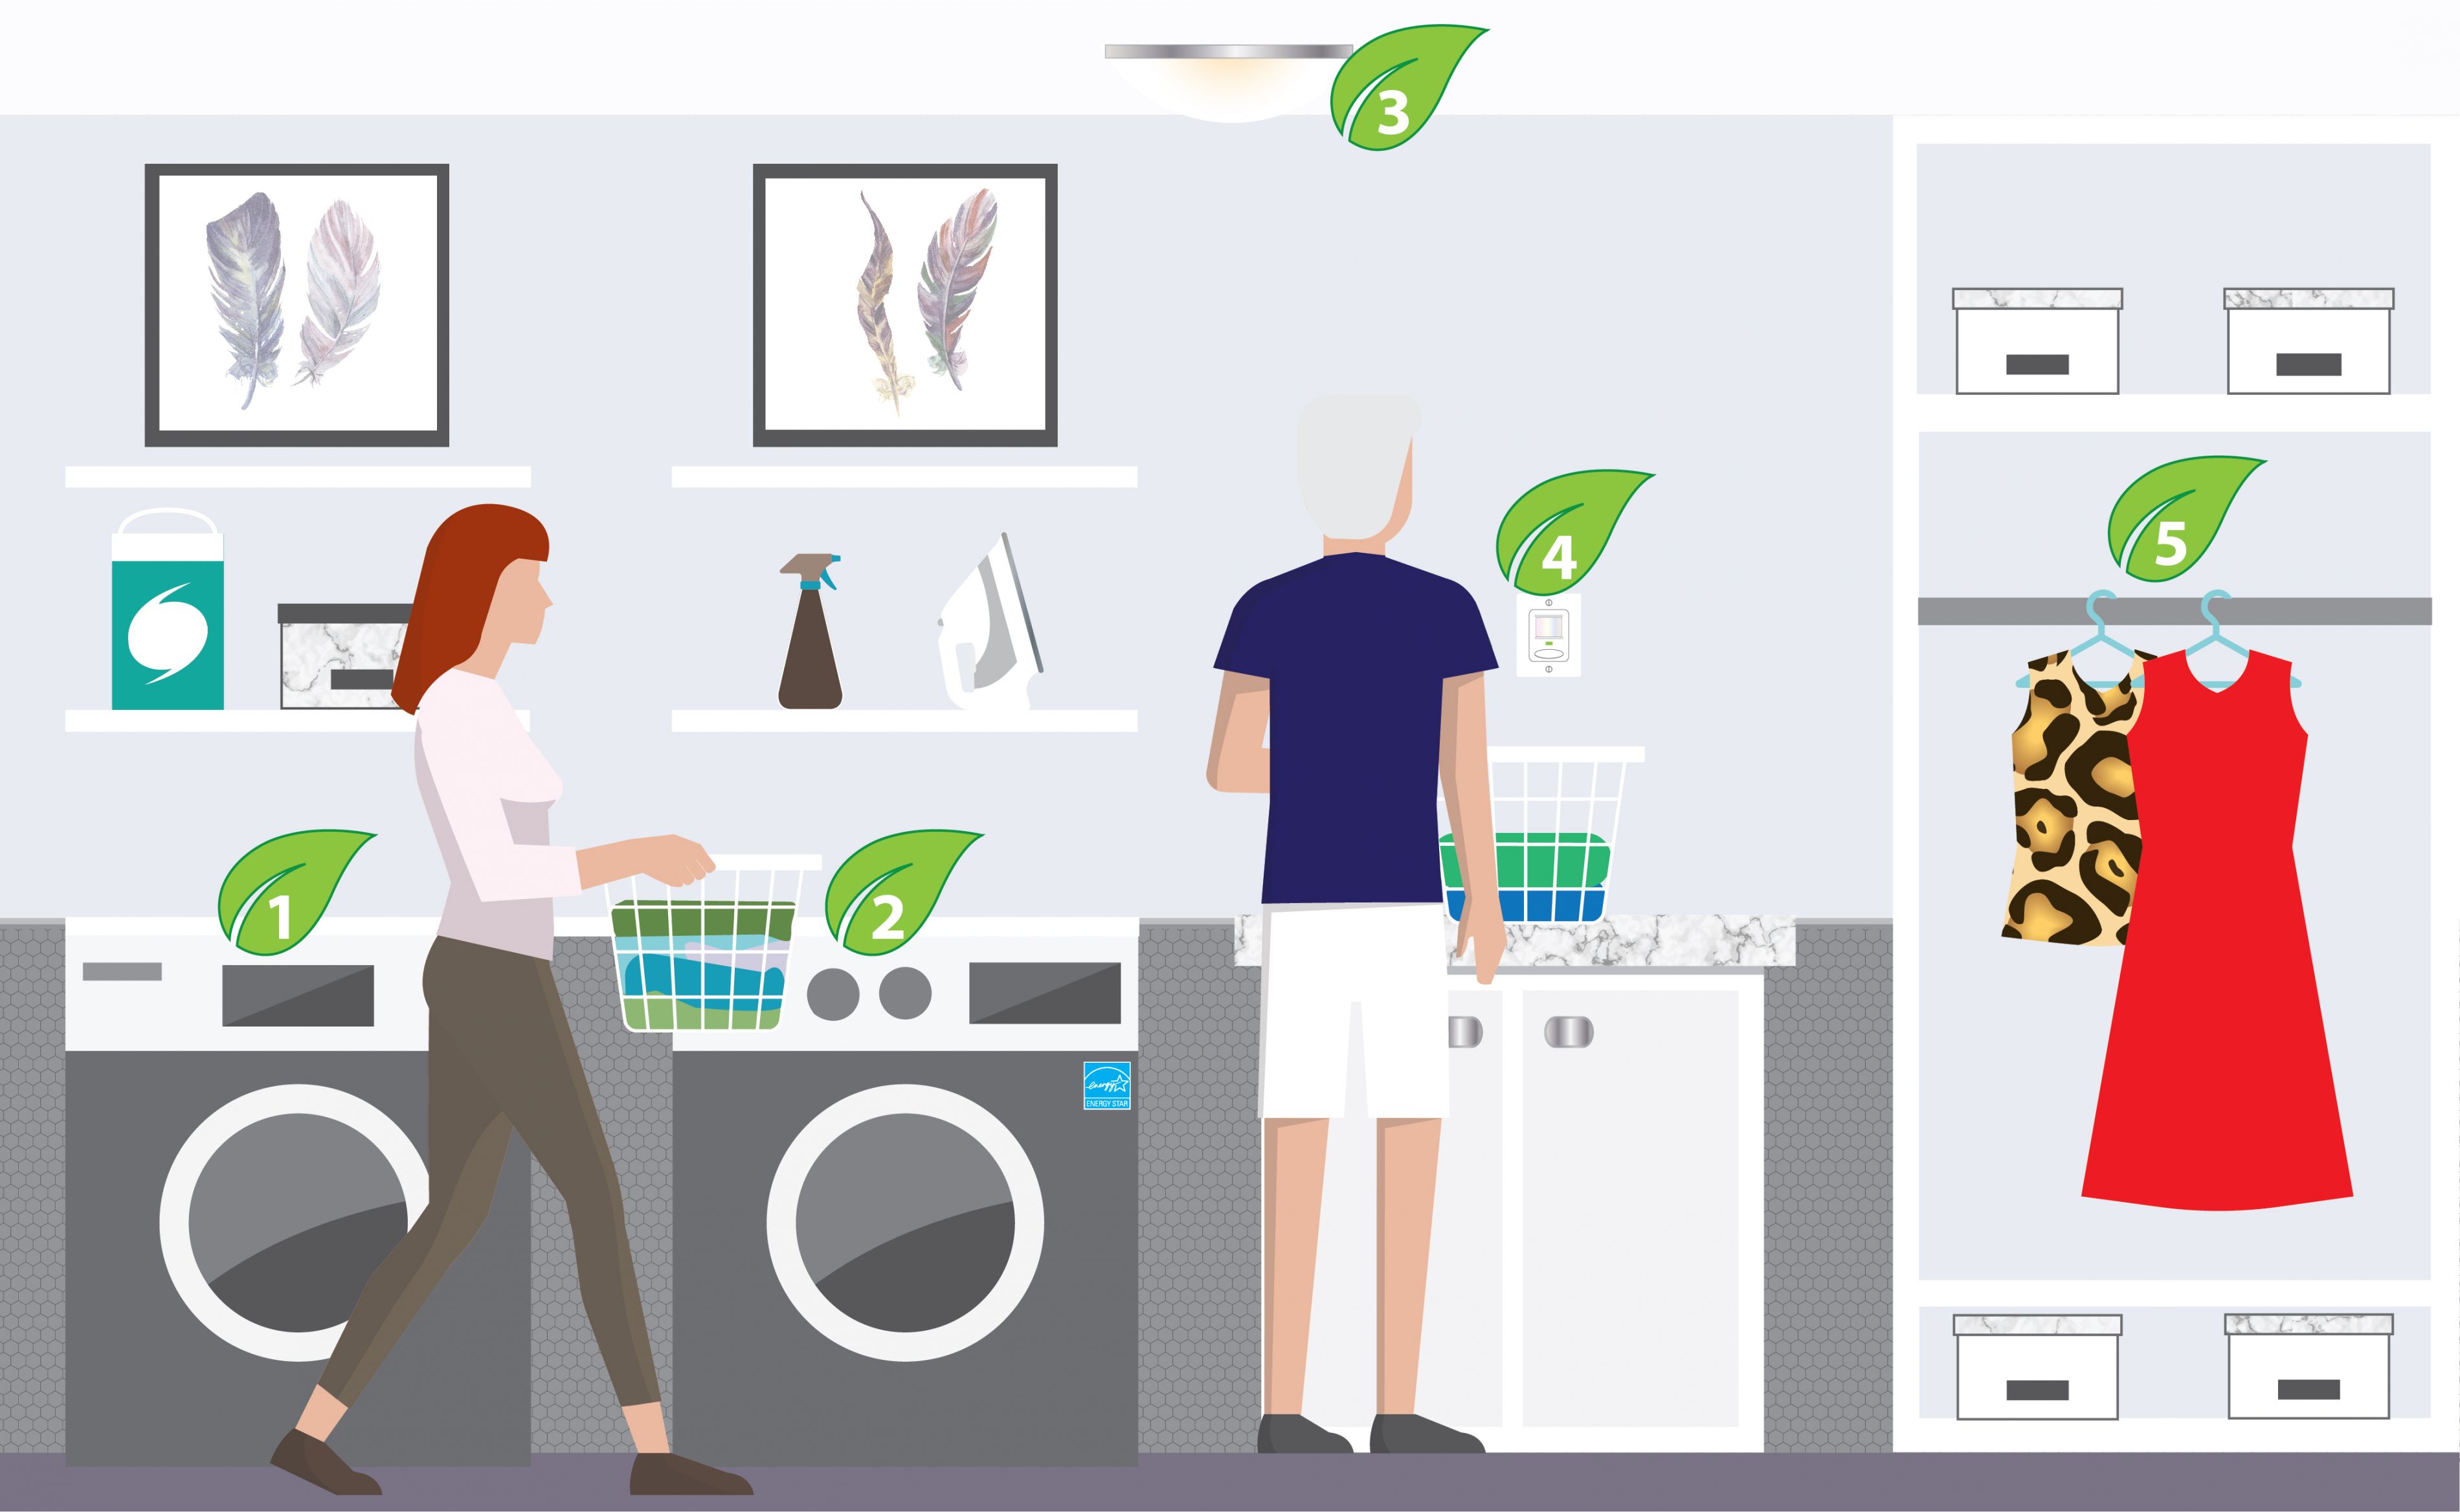 A laundry room of a home with five numbers identifying different areas of the room. 1) A washing machine 2) A dryer 3) A ceiling light fixture 4) A light switch 5) A clothes rack